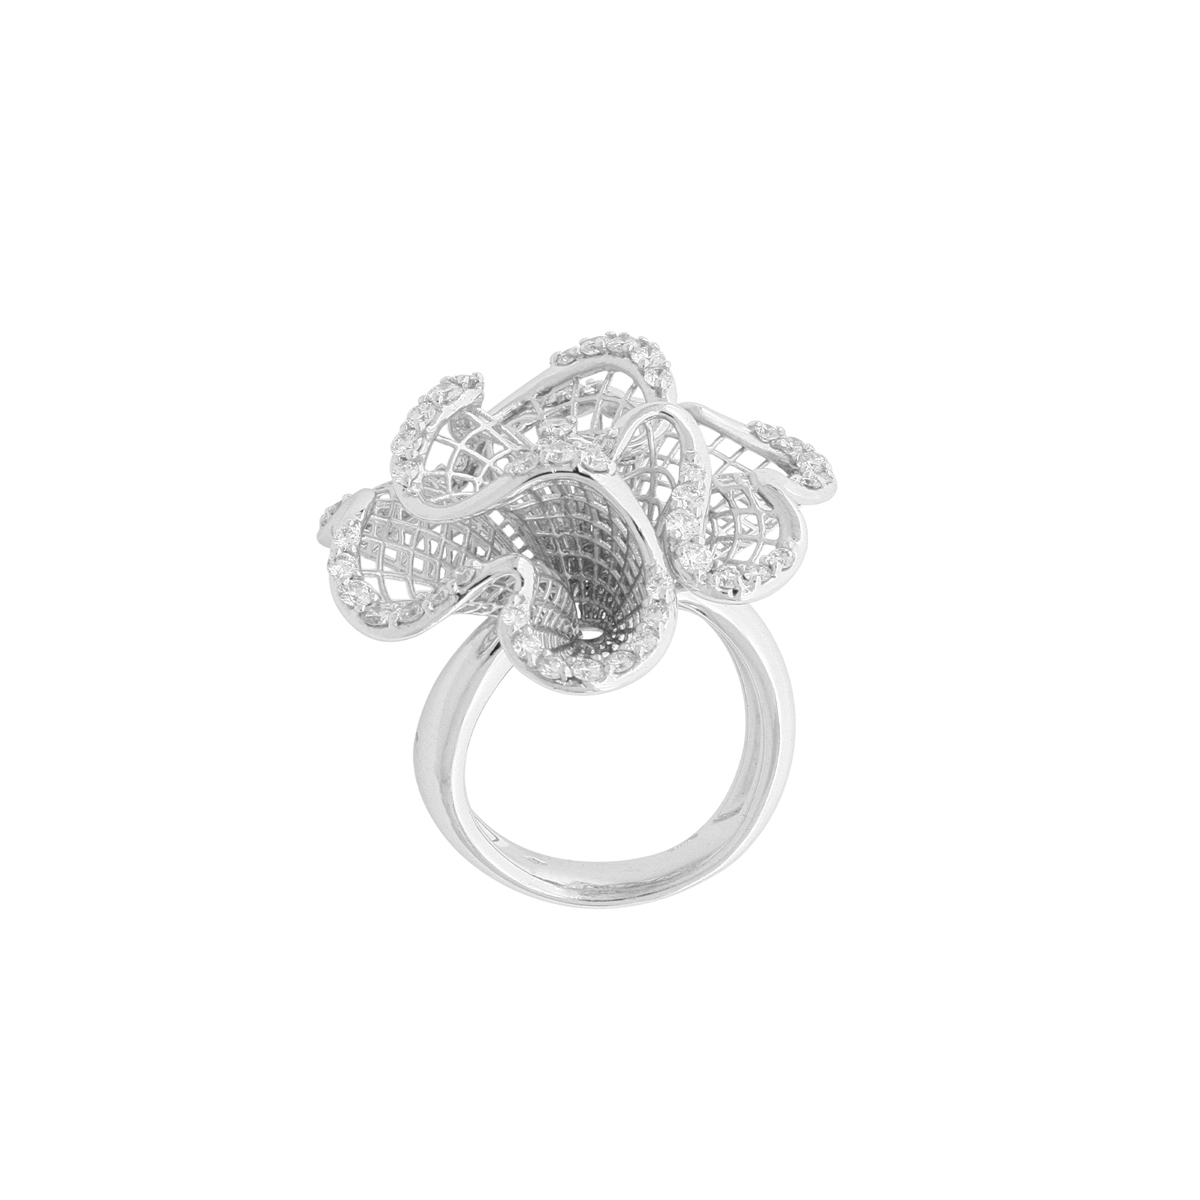 White Gold Wavy Ring with Diamonds